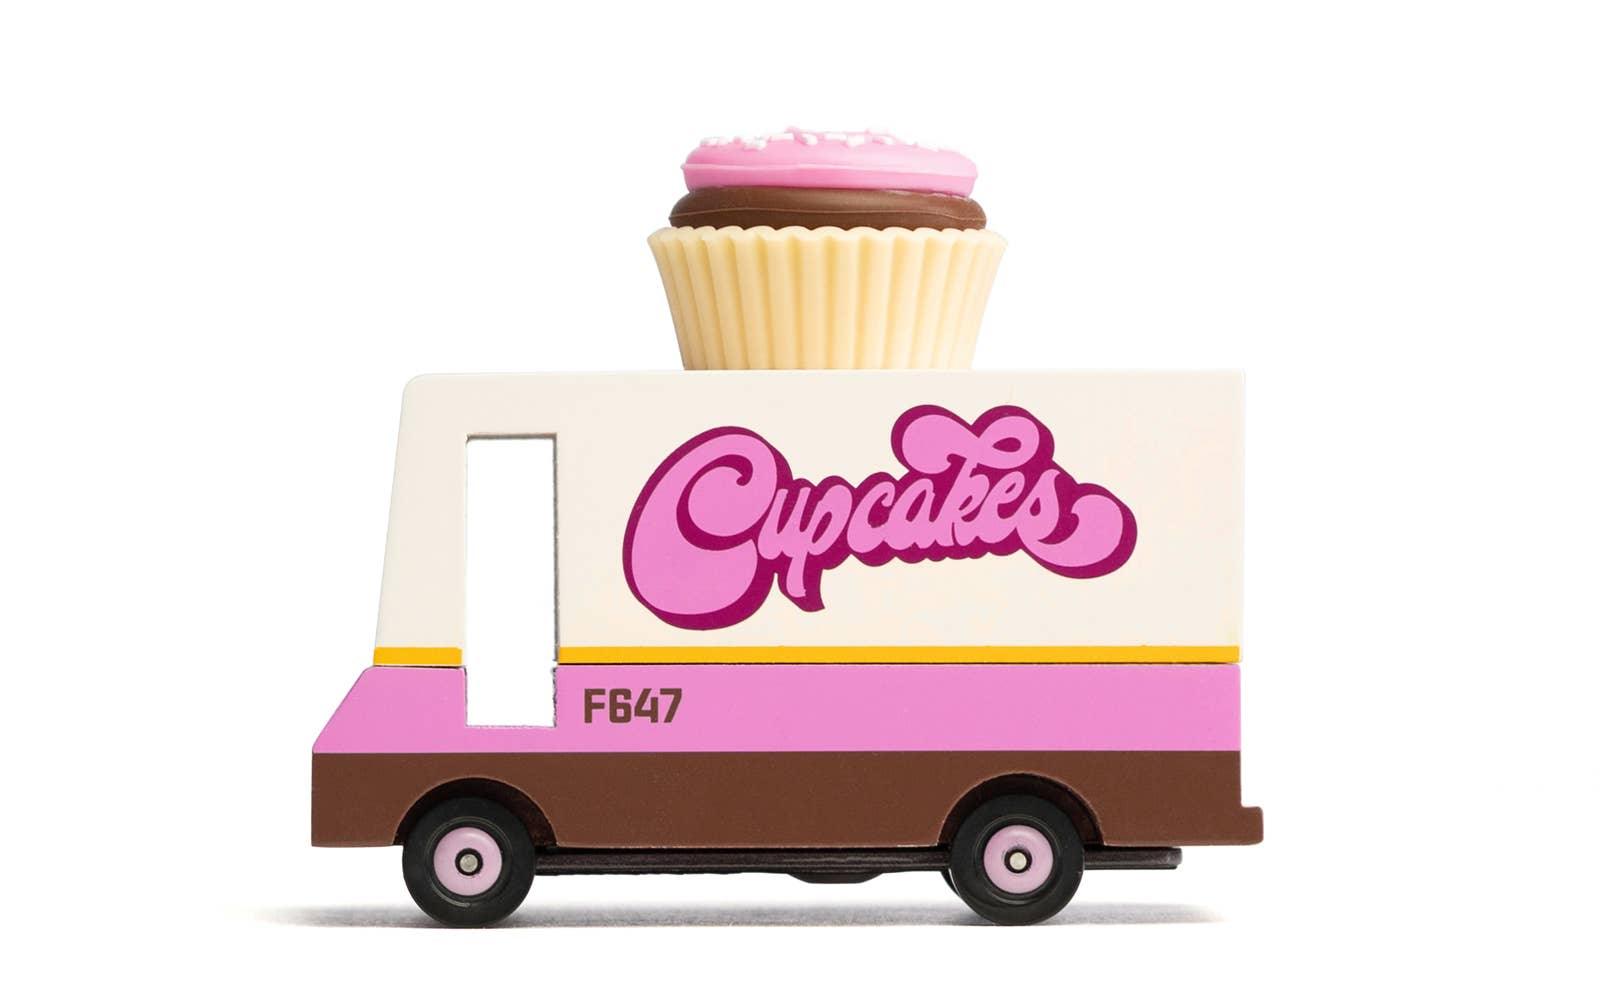 Cupcake Van - Why and Whale